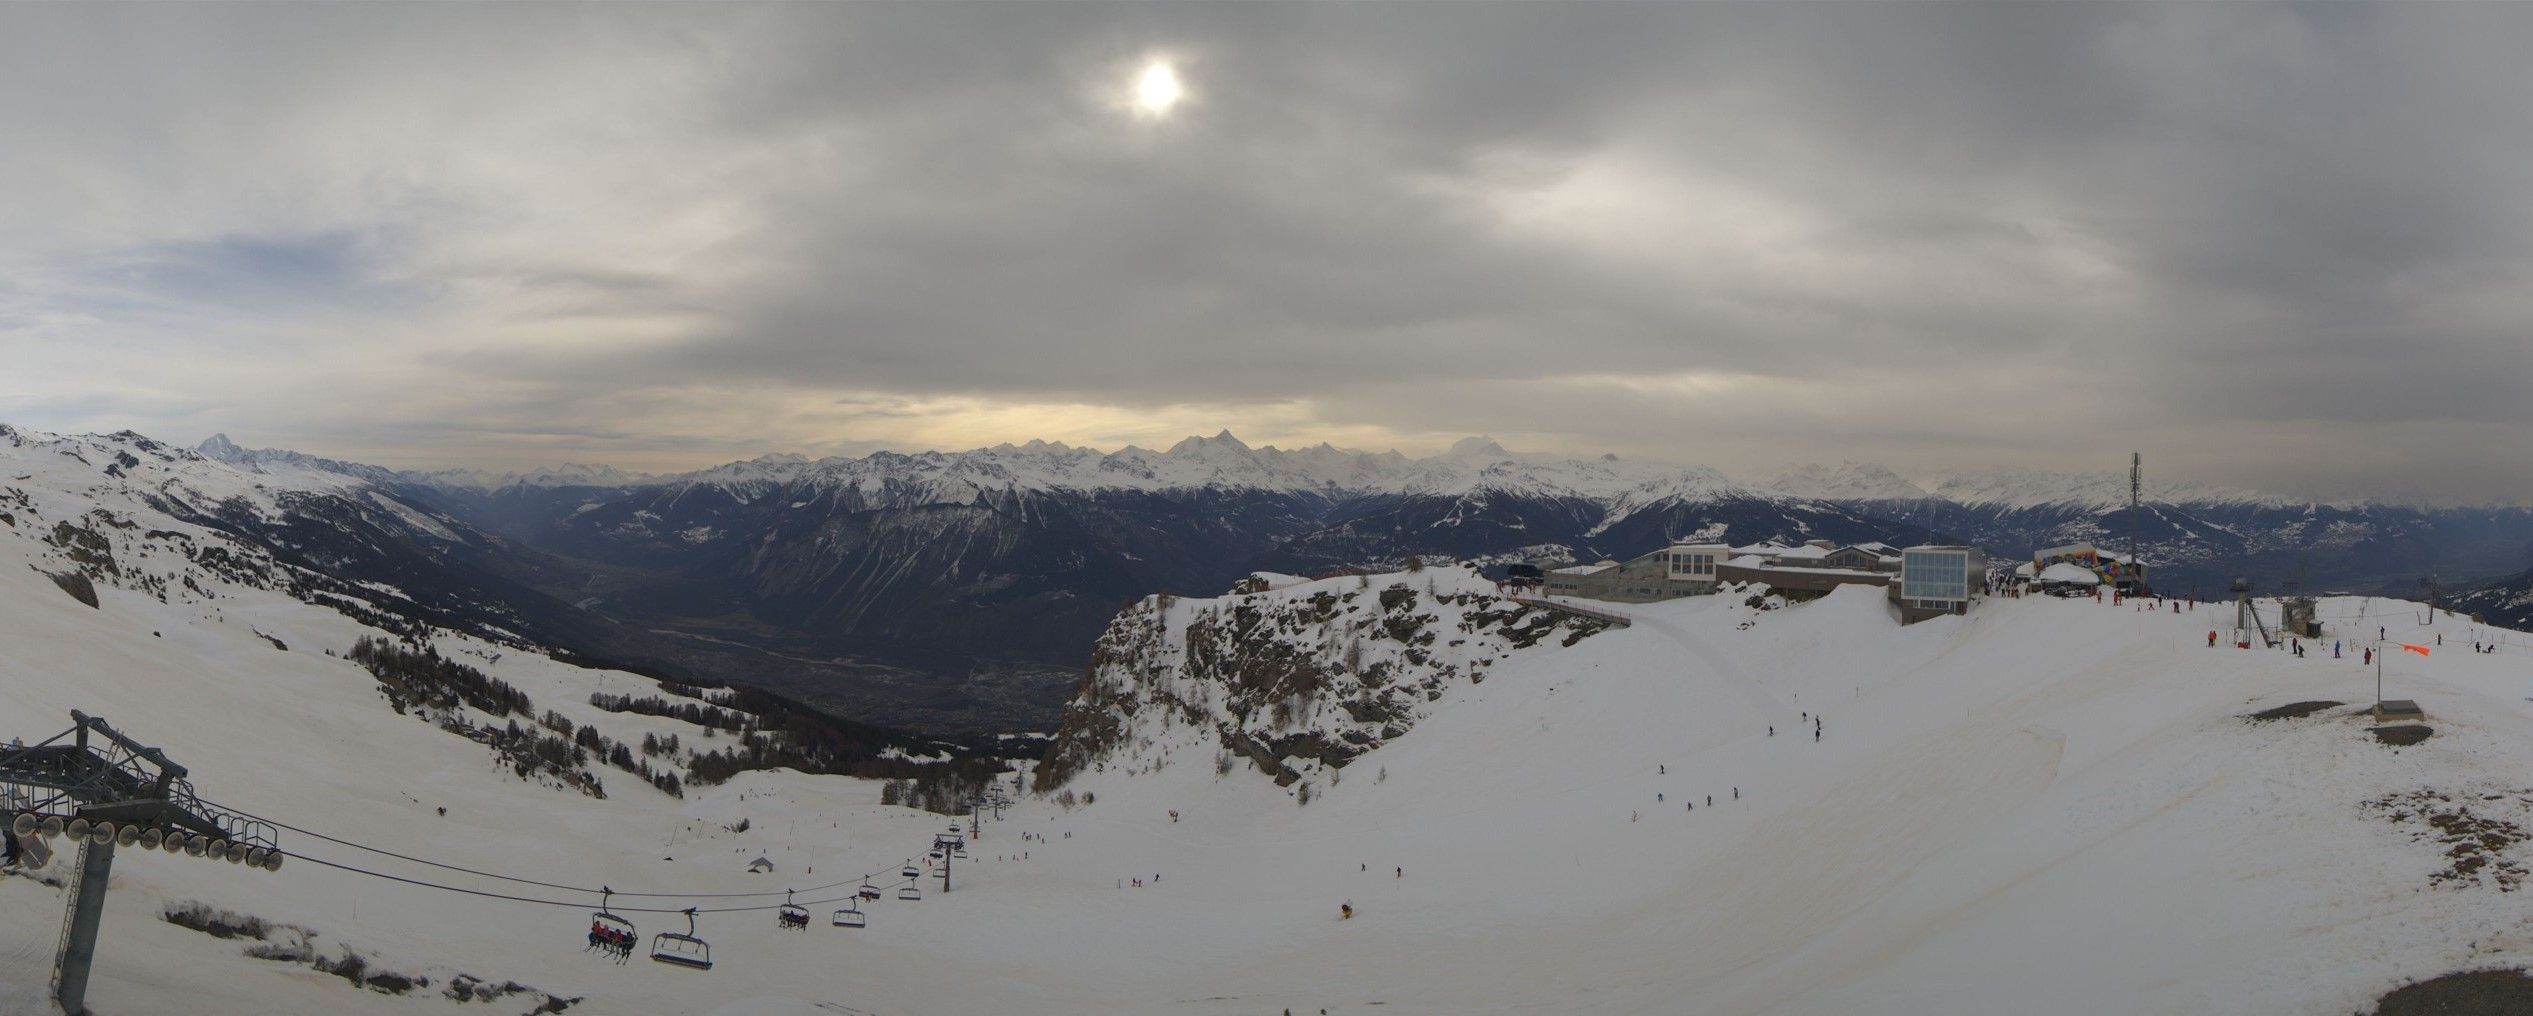 Mostly cloudy and a watery sun in Crans-Montana (roundshot.com)